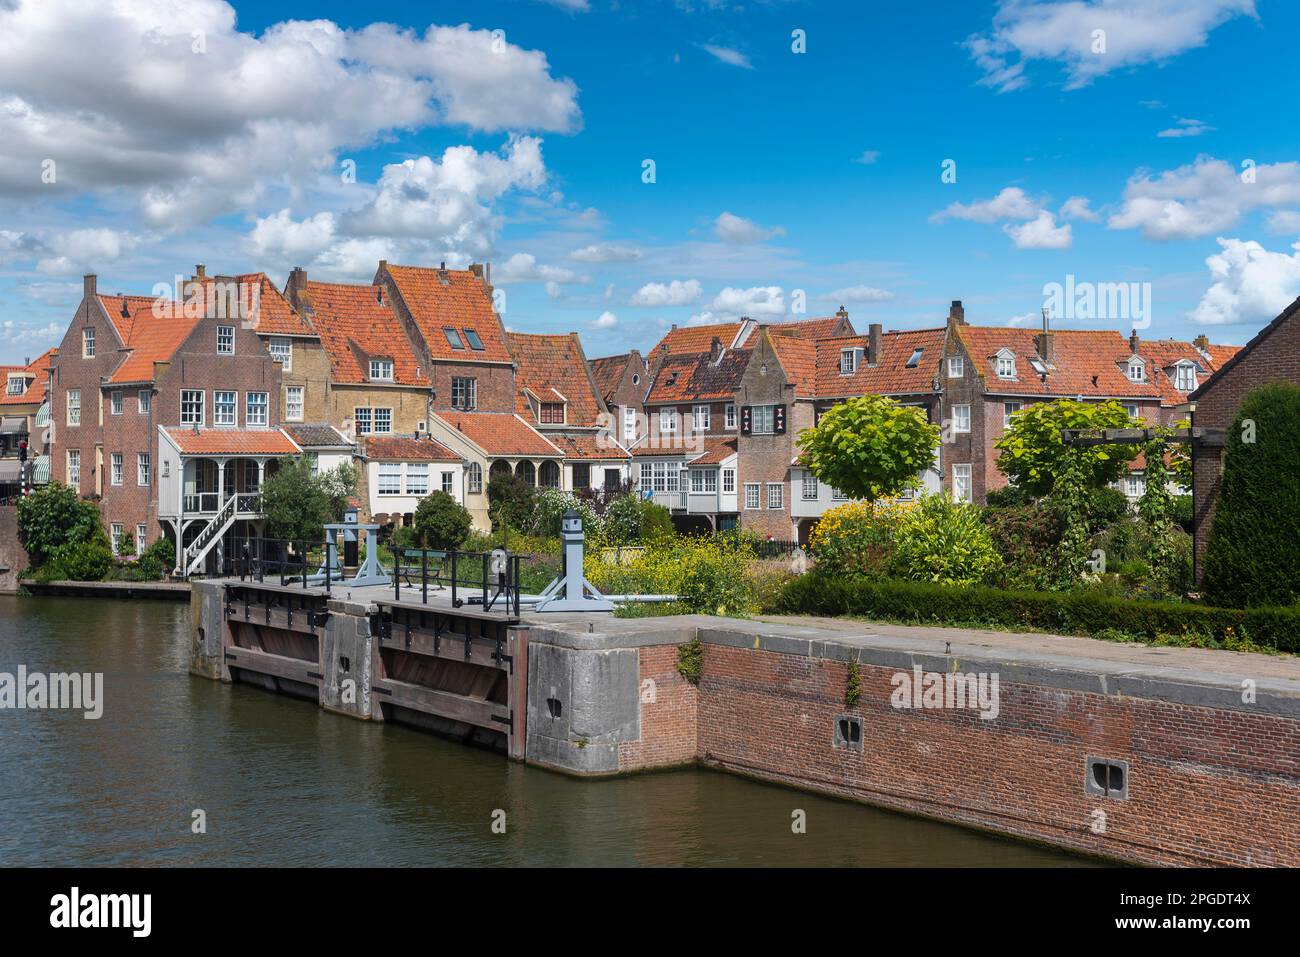 Historic old town near the old port, Enkhuizen, North Holland, Netherlands, Europe Stock Photo